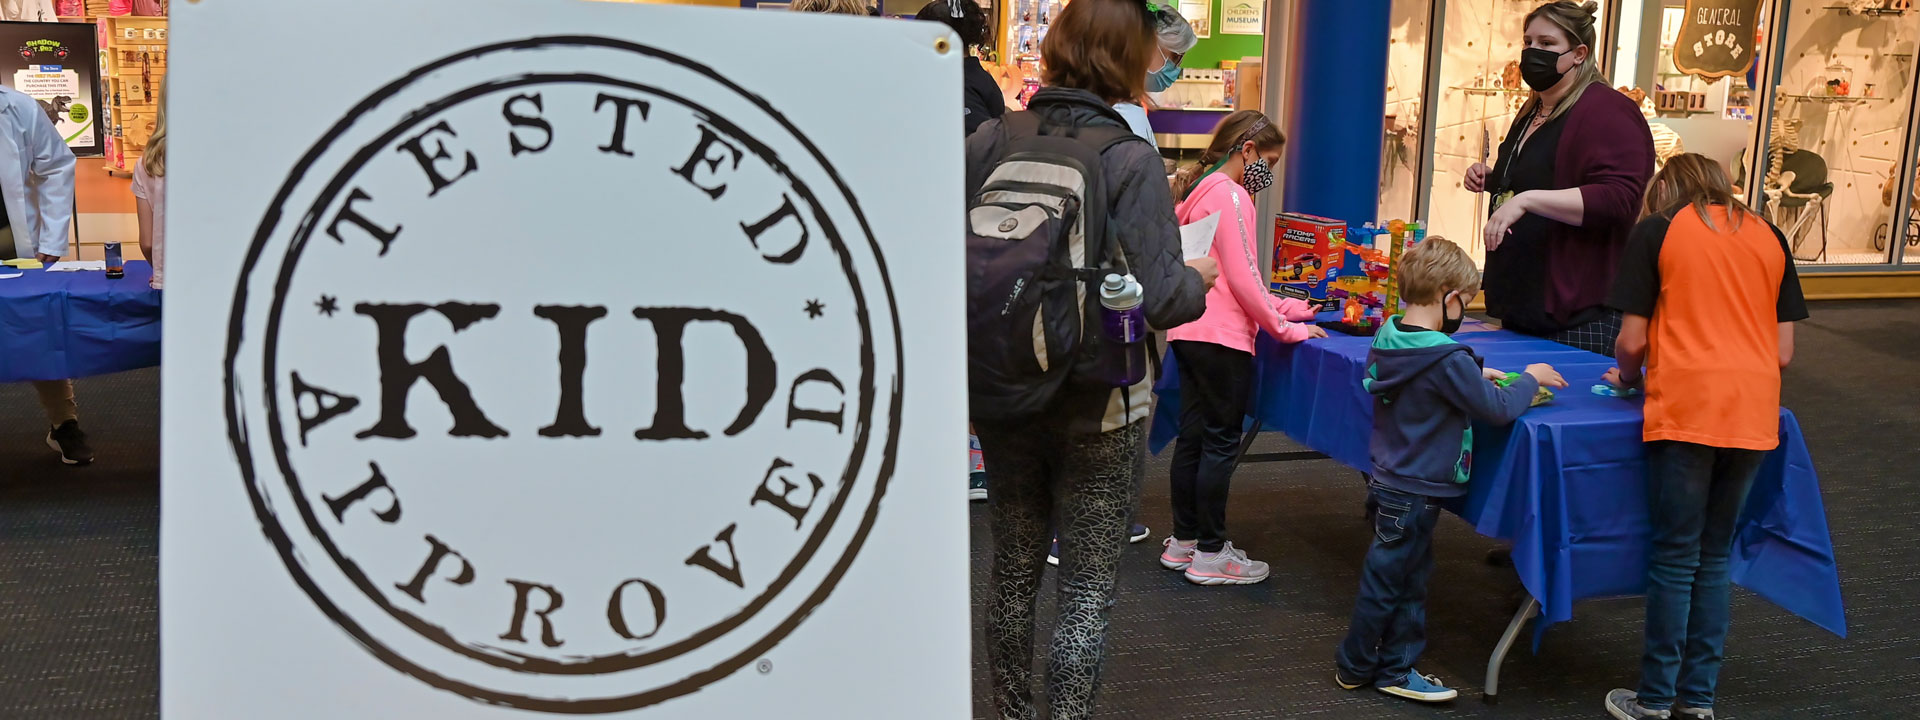 Kid-Tested, Kid-Approved testing sign and families playing with toys outside The Children's Museum Store.